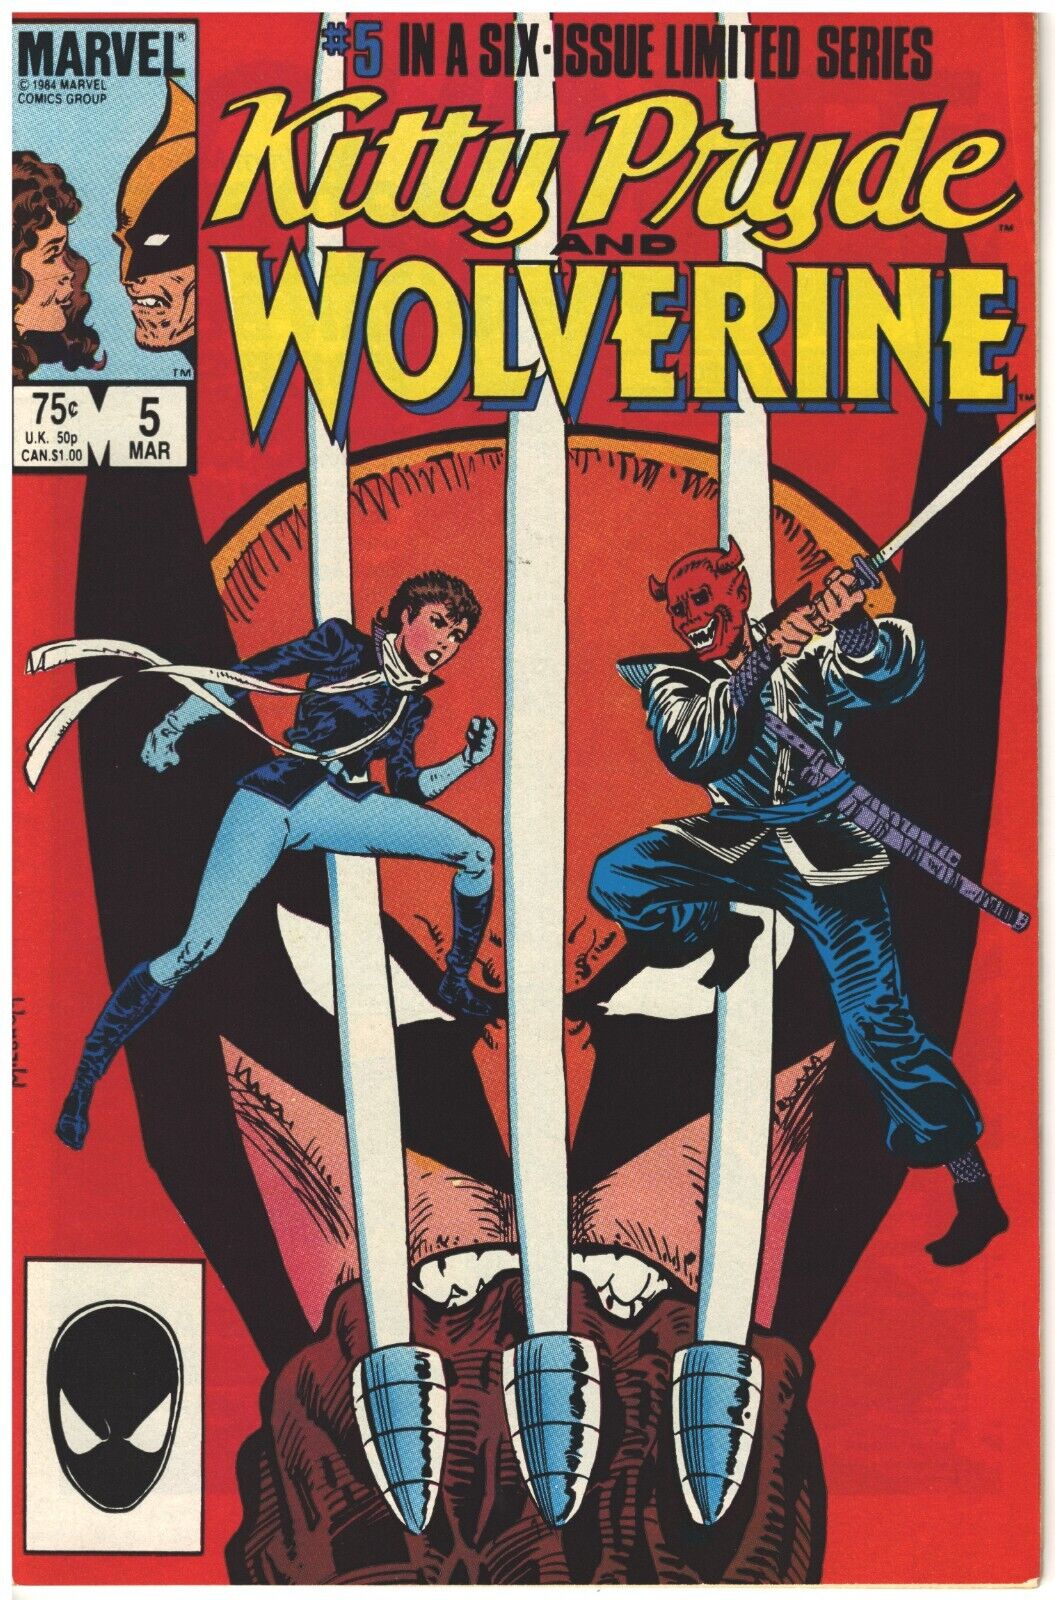 Kitty Pryde and Wolverine #5 March 1985 / FINE